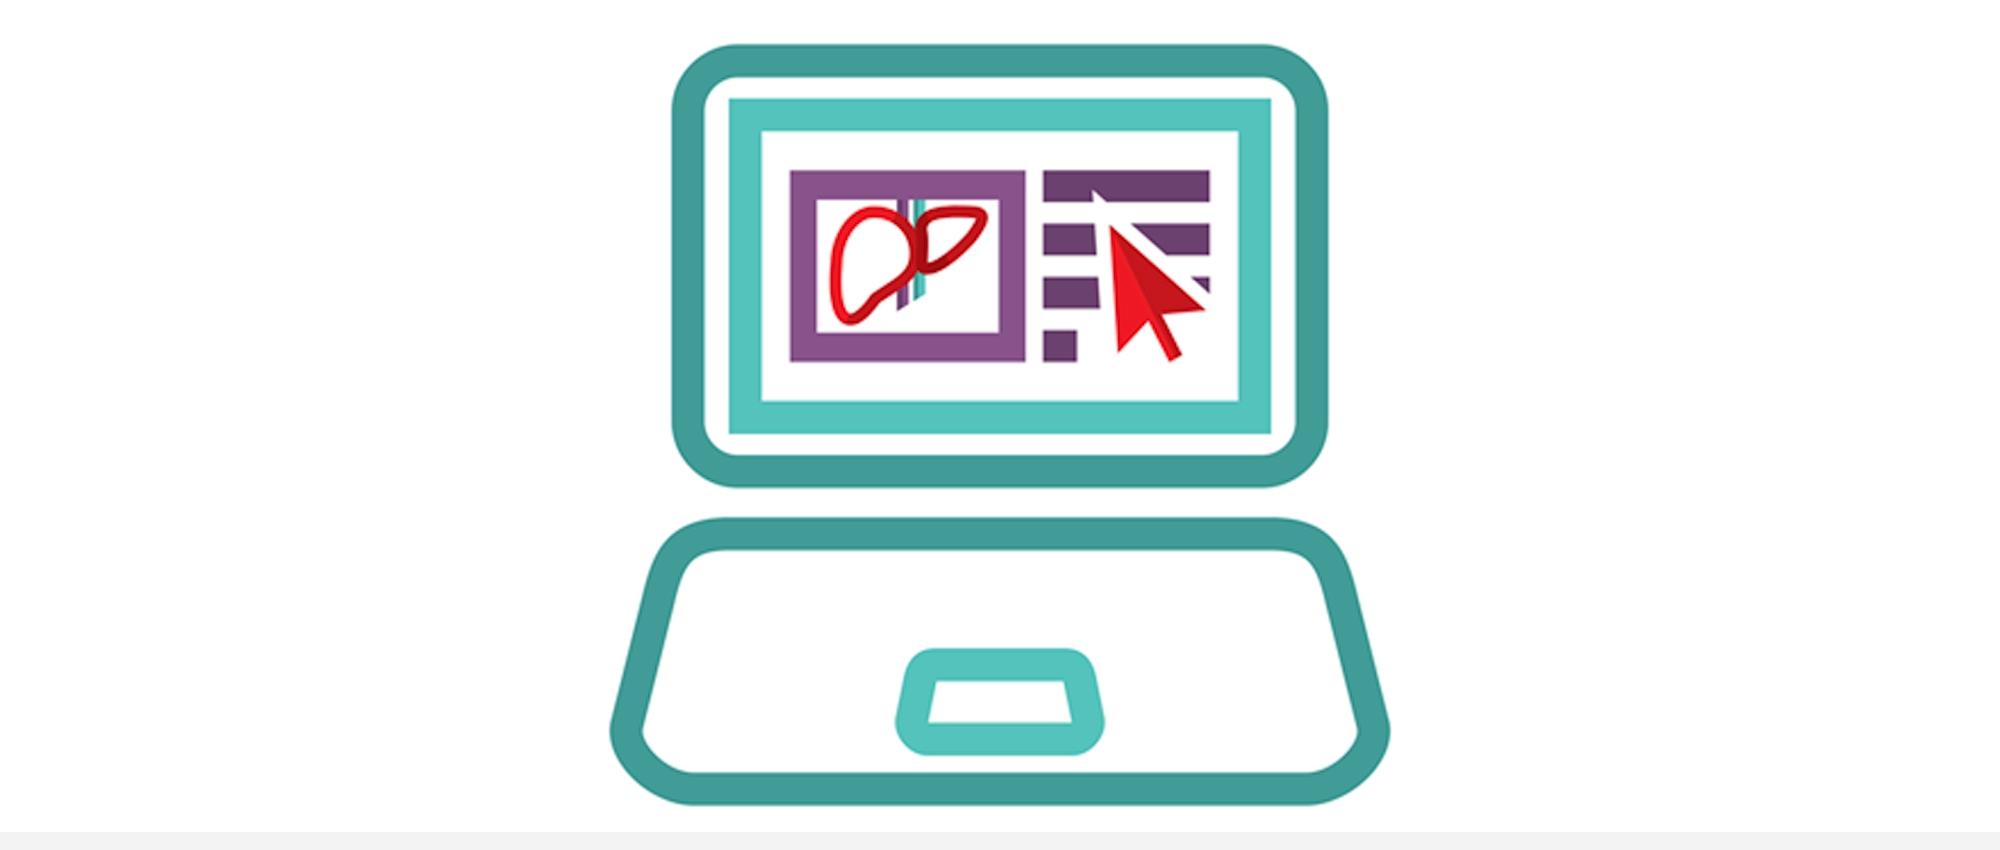 graphic of laptop with organs and tissue donation icon displayed on monitor